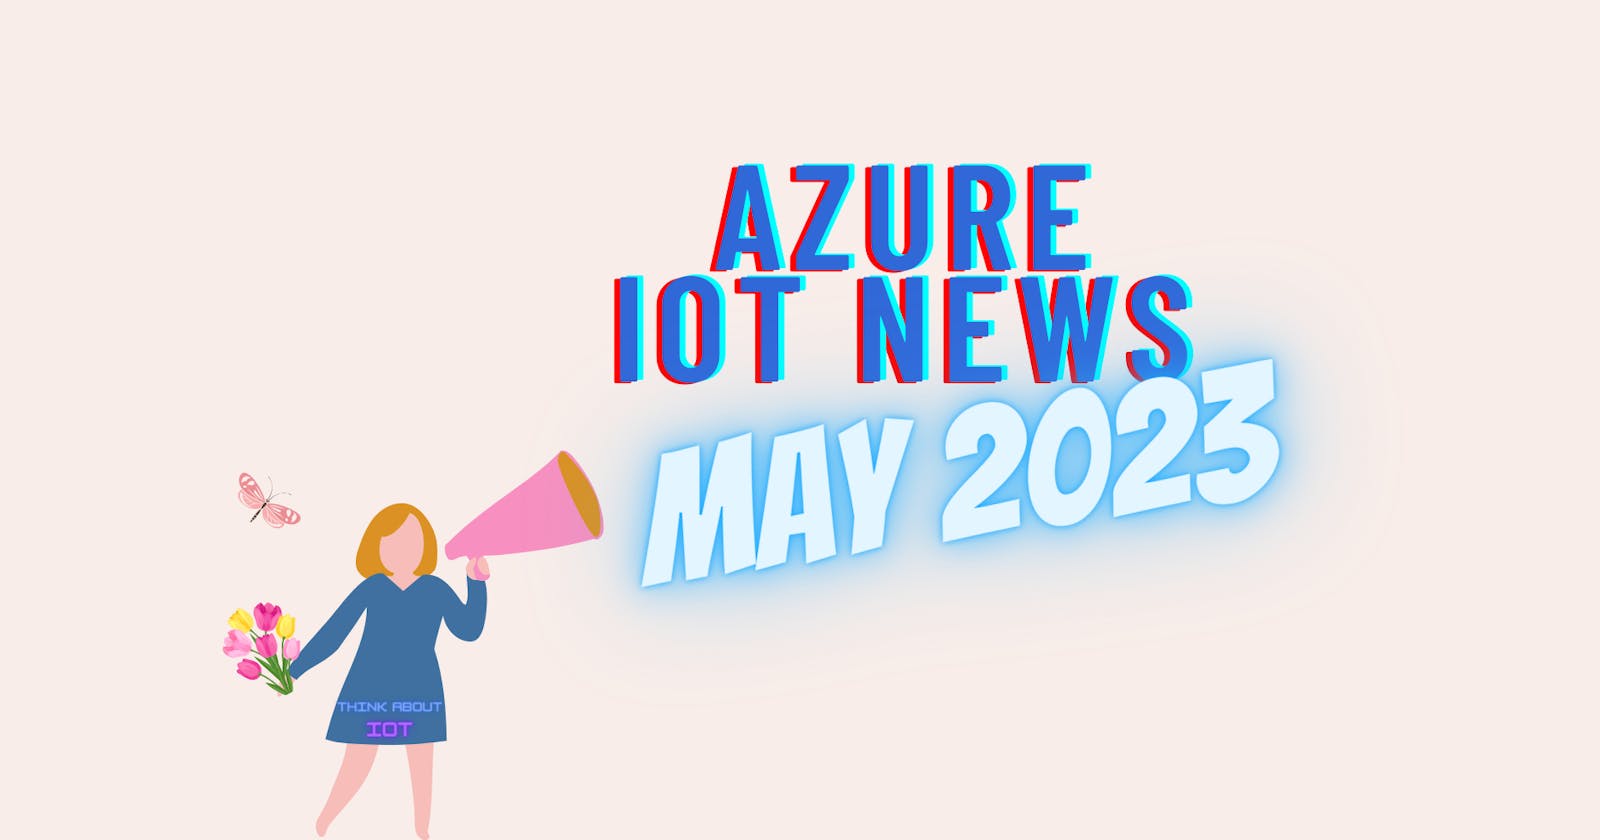 Azure IoT News – May 2023 by Think About IoT